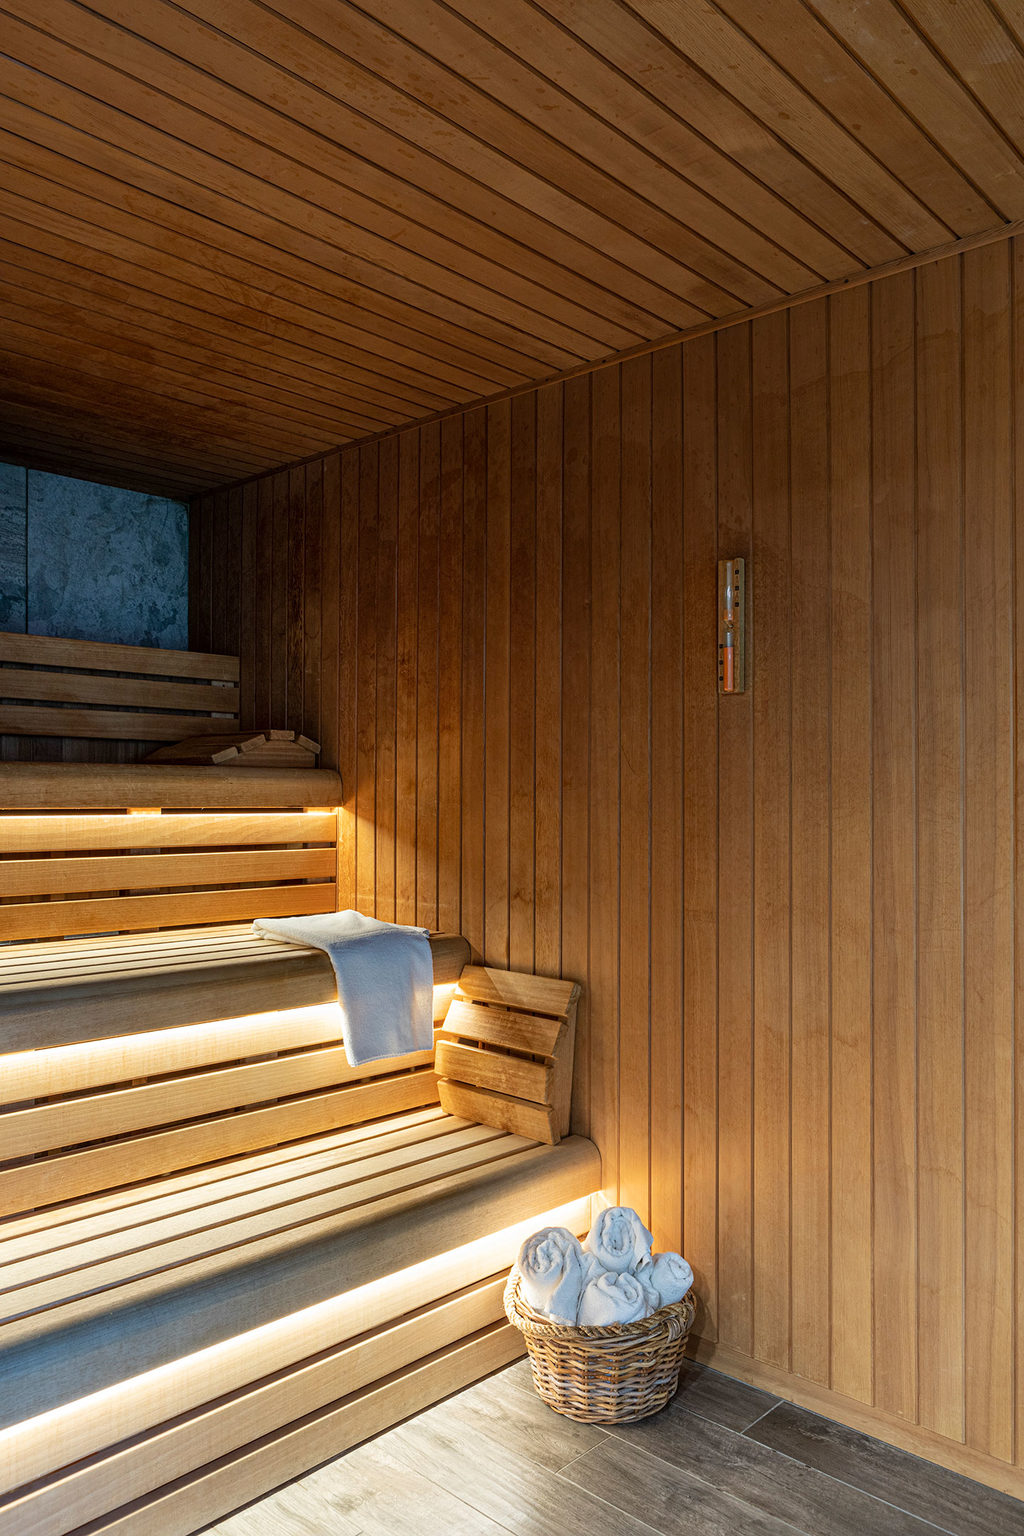 Inside a sauna at Swinton Country Club and Spa near Harrogate and the Yorkshire Dales in North Yorkshire